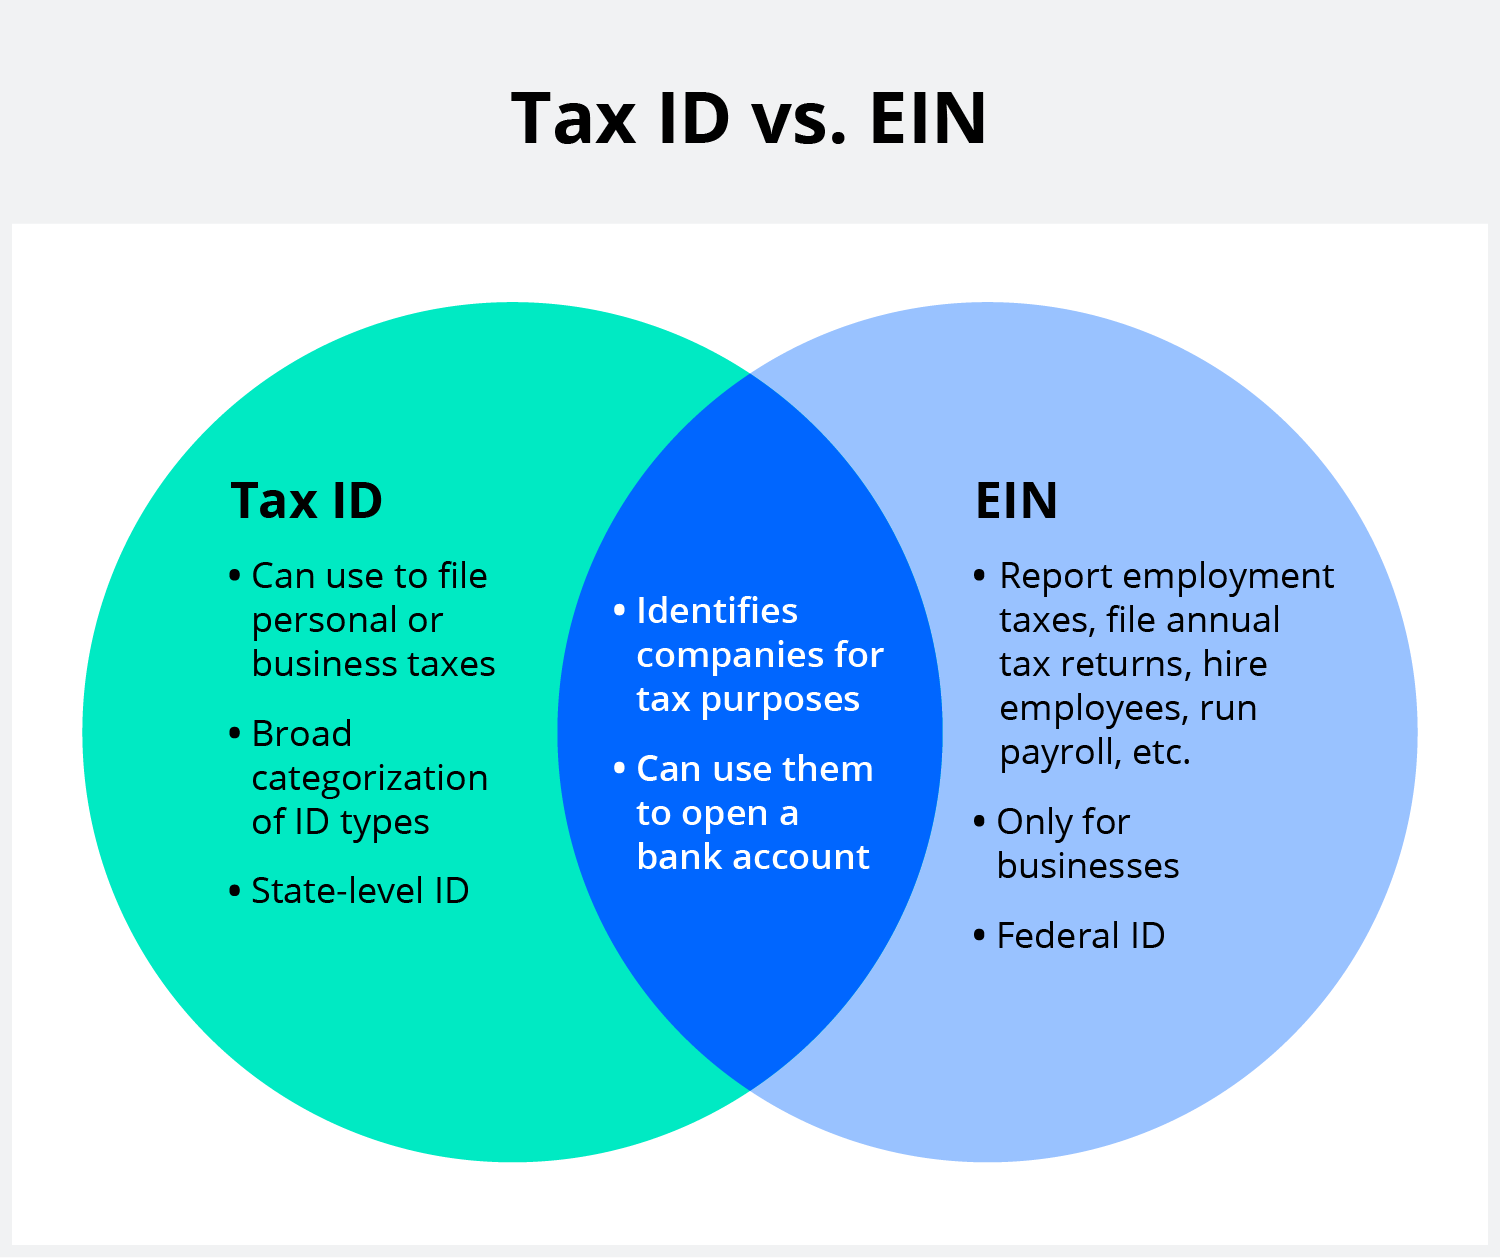 The similarities and differences between general tax IDs and EINs. 